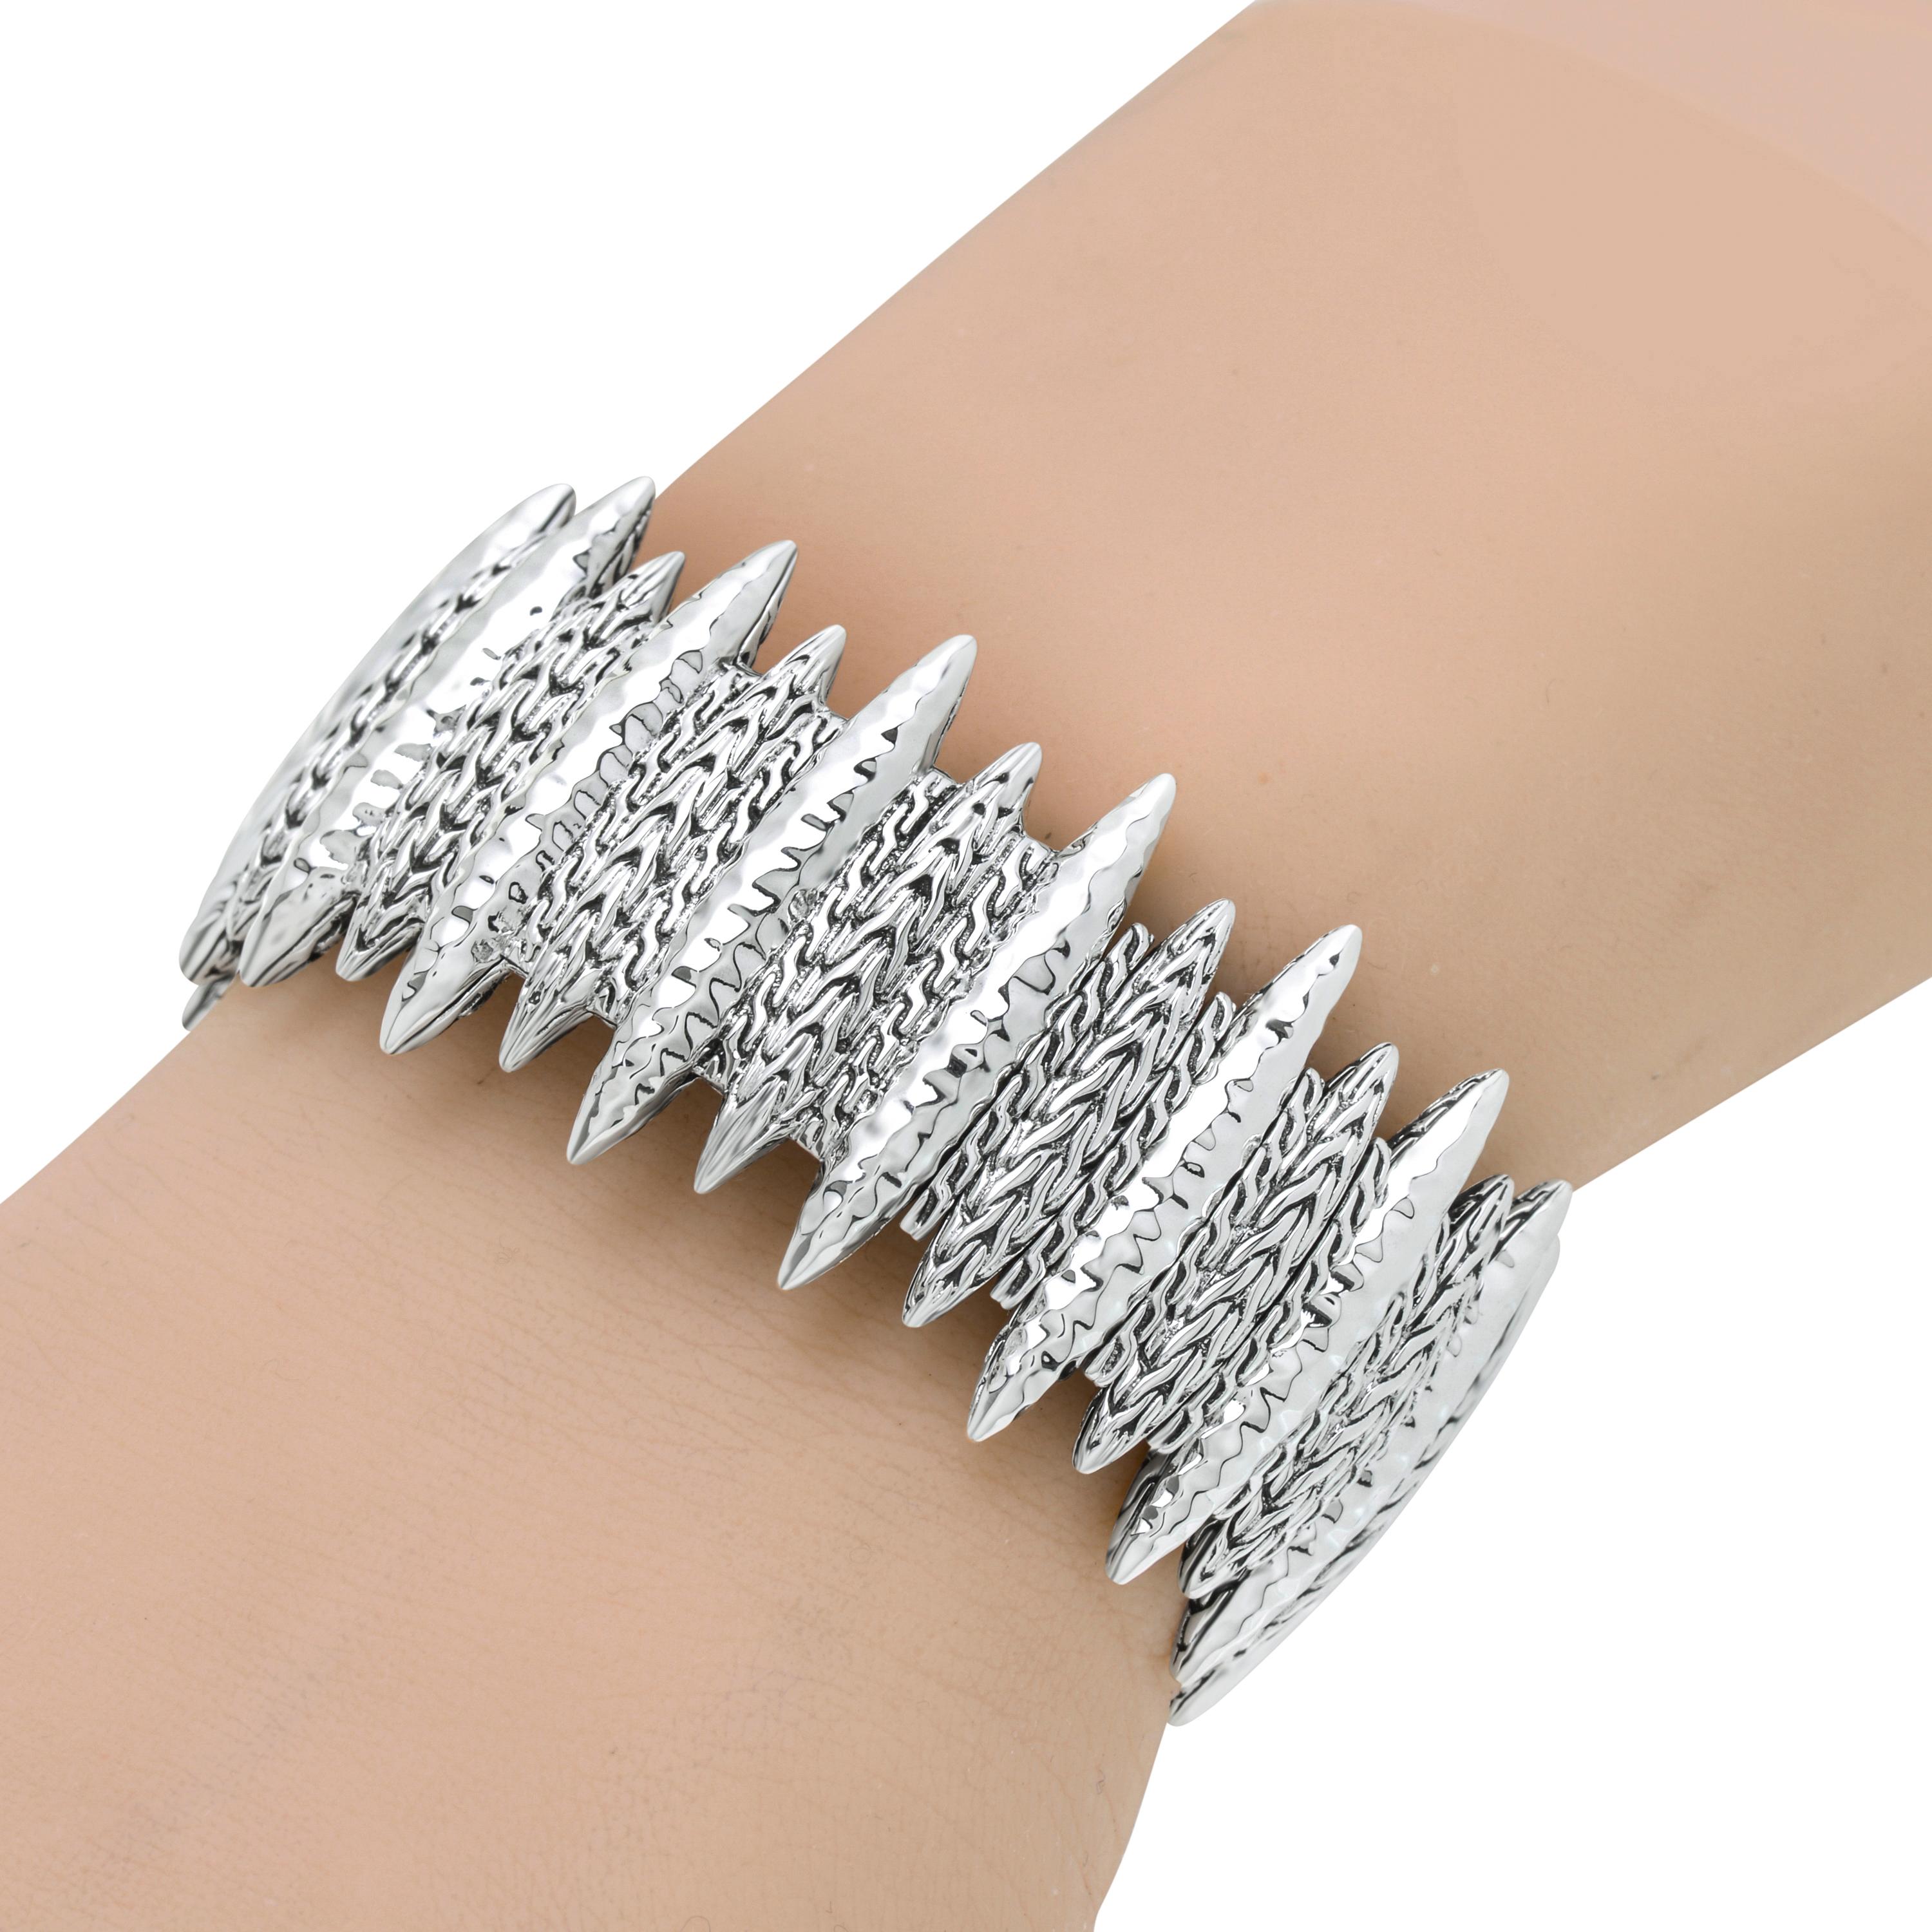 This edgy John Hardy Sterling Silver Cuff Bracelet features an adventurous pattern of spears with alternating decorations of hammered texture and John Hardy classic chain motif. Primarily inspired by jewelry making traditions in Bali, John Hardy is